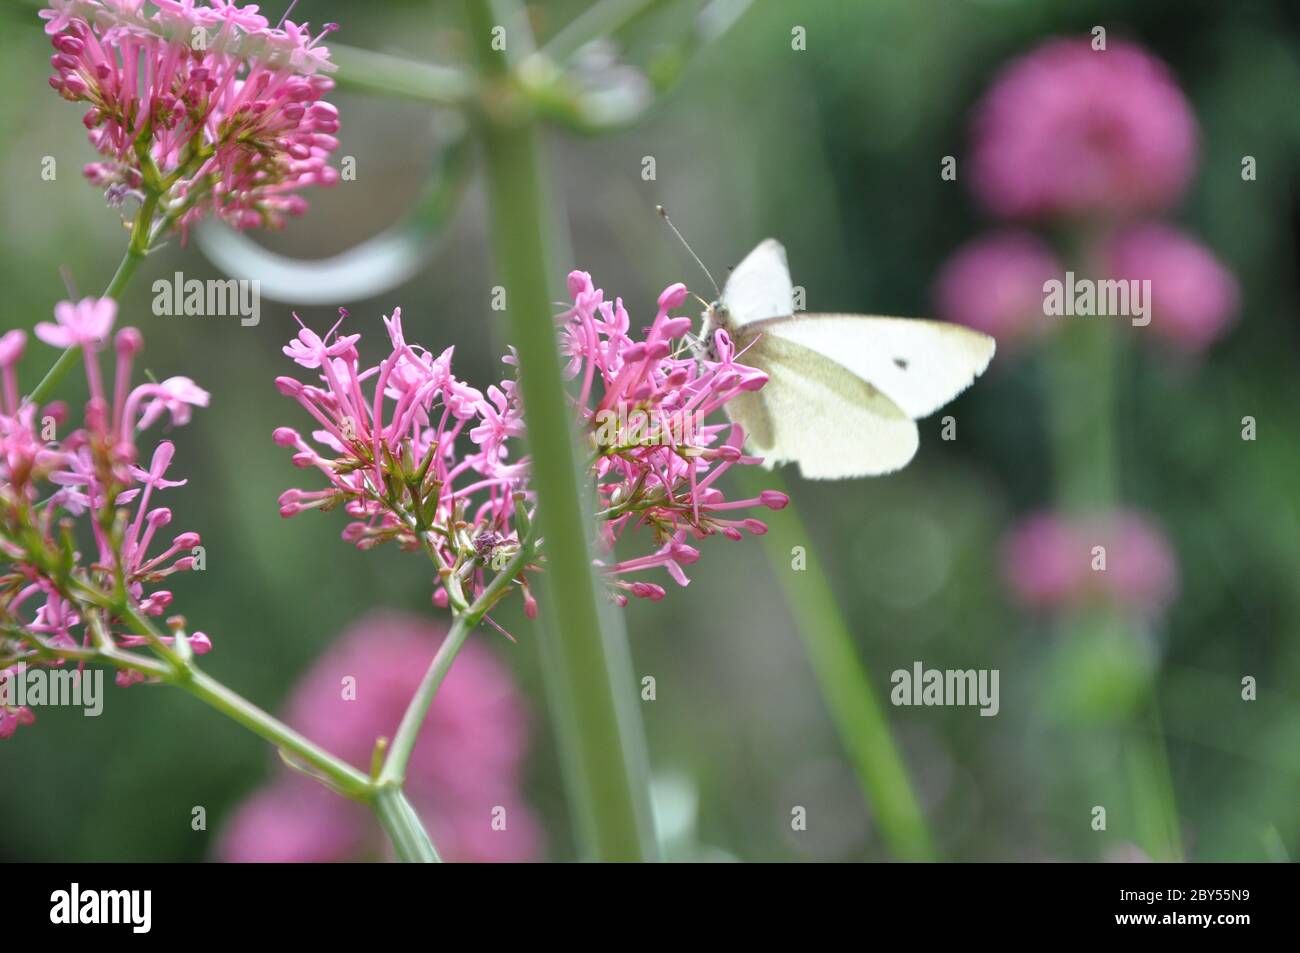 Small cabbage white butterfly. Stock Photo